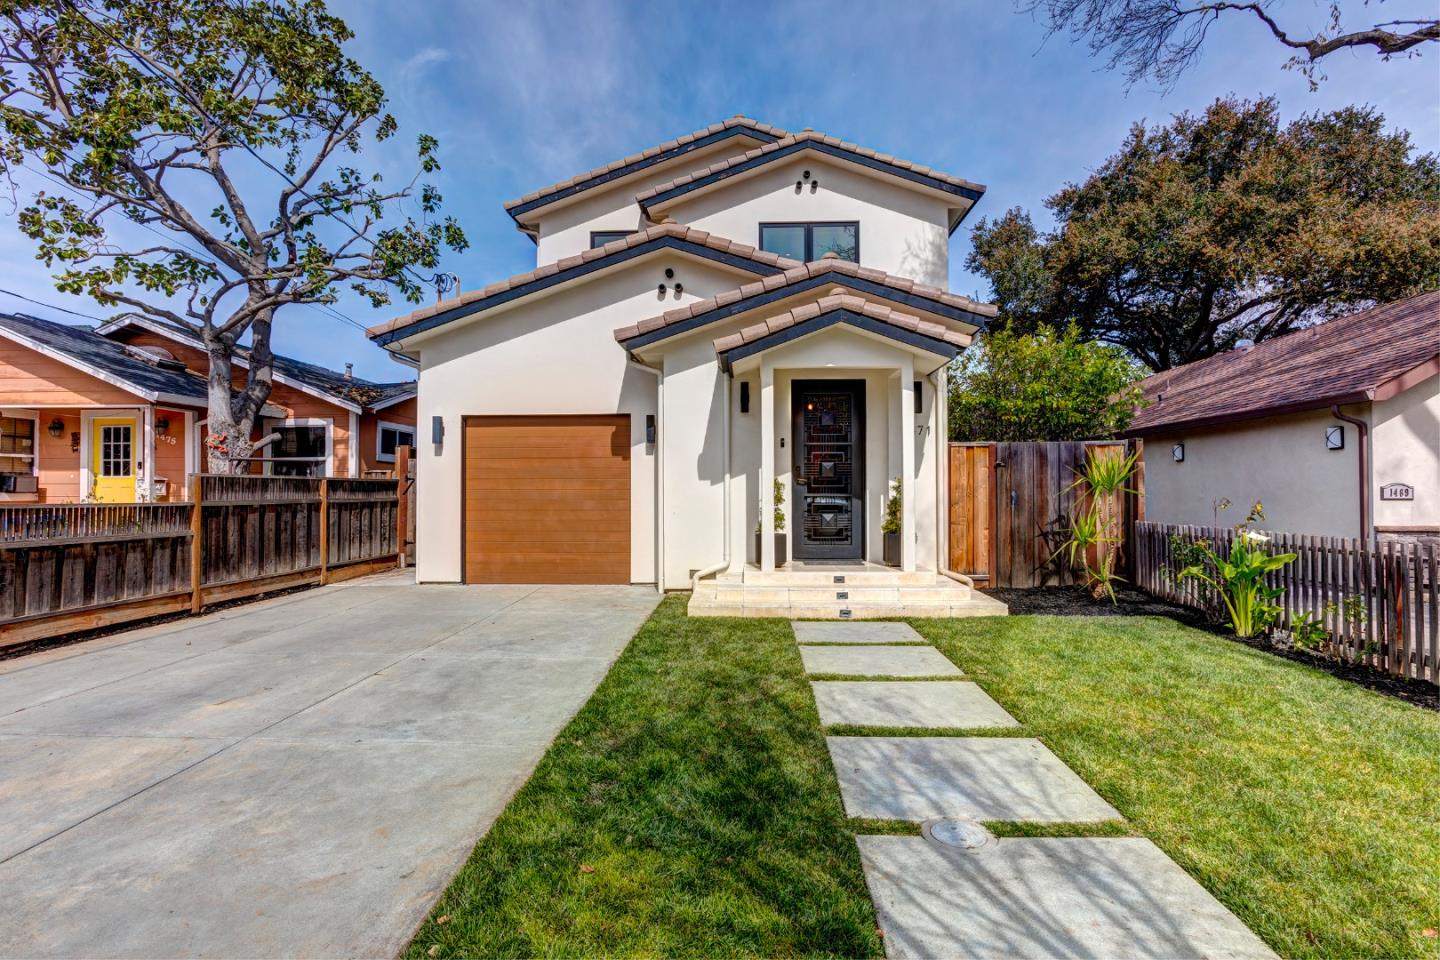 Photo of 1471 Richards Ave in San Jose, CA